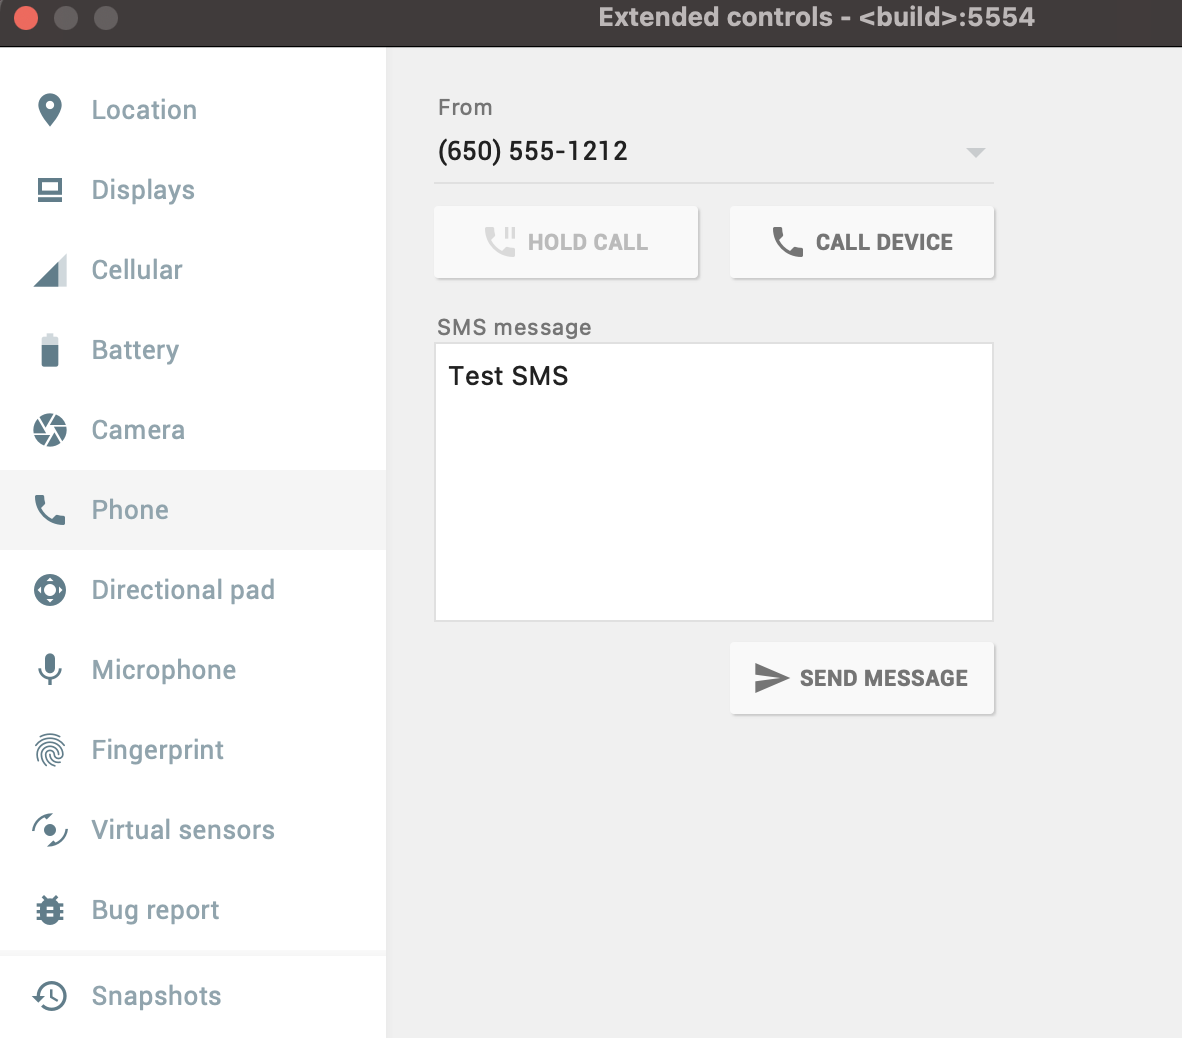 Send Dummy SMS from Android Studio Emulator